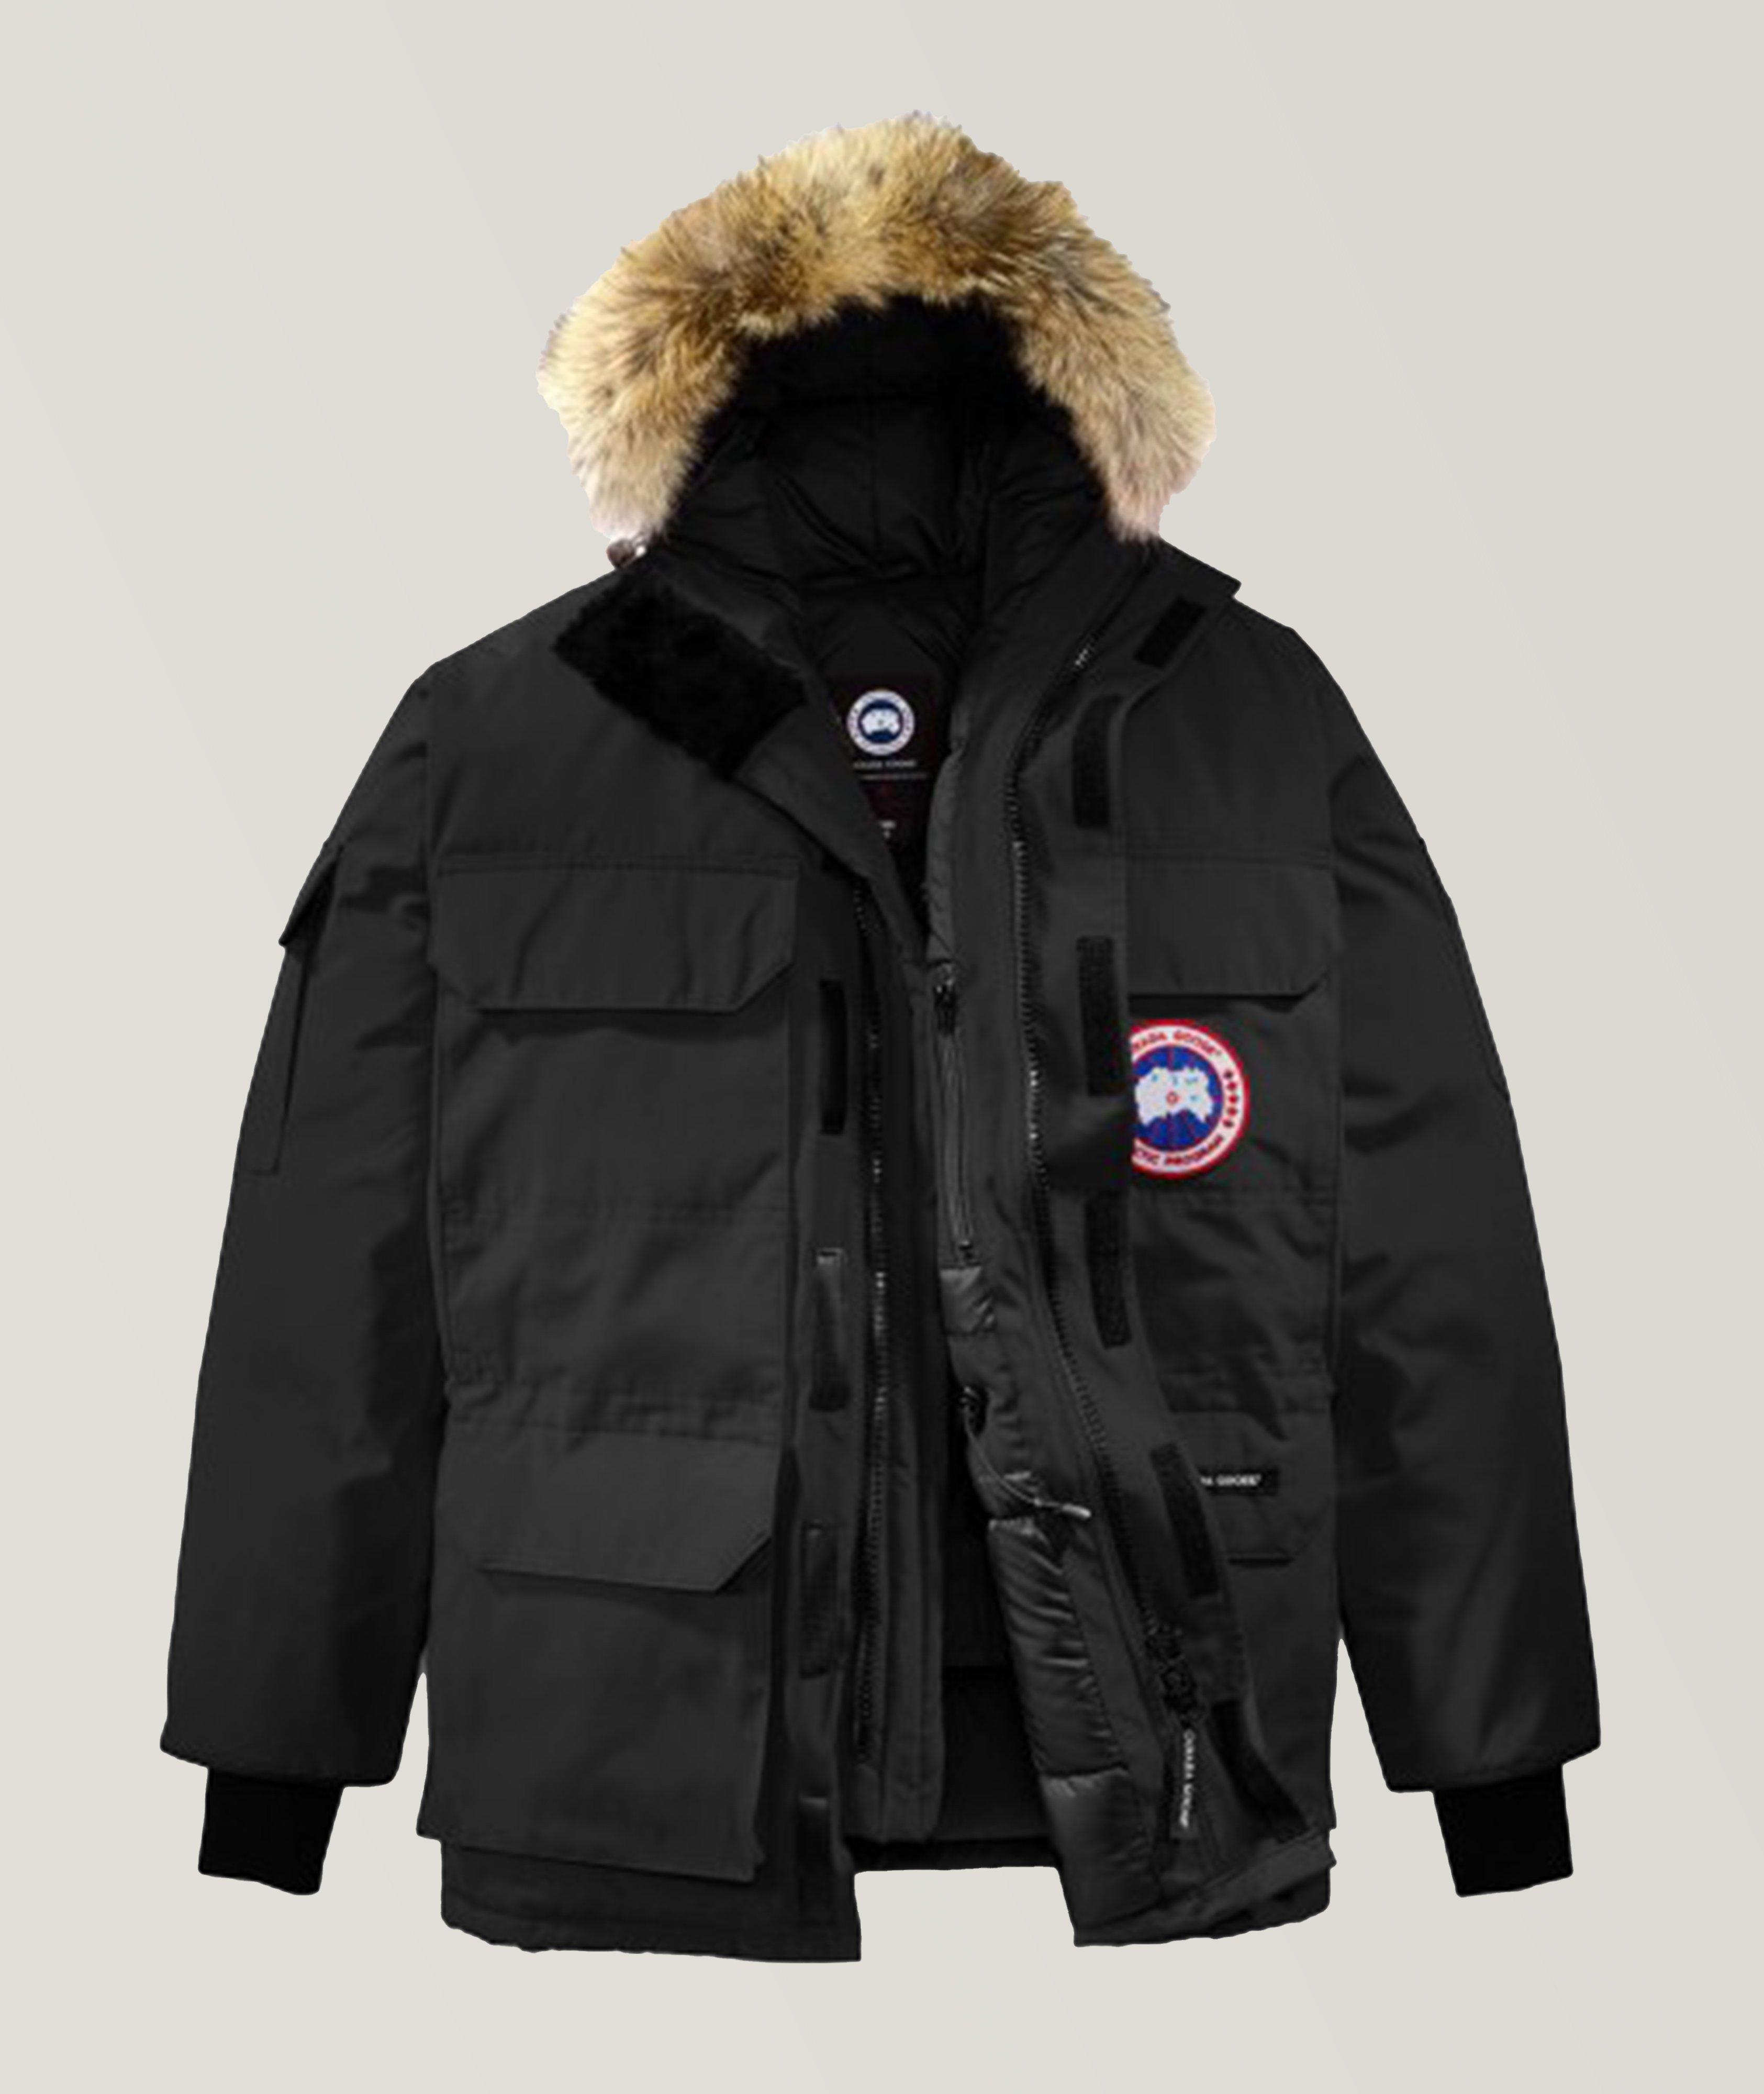 Fusion Fit Expedition Parka image 0